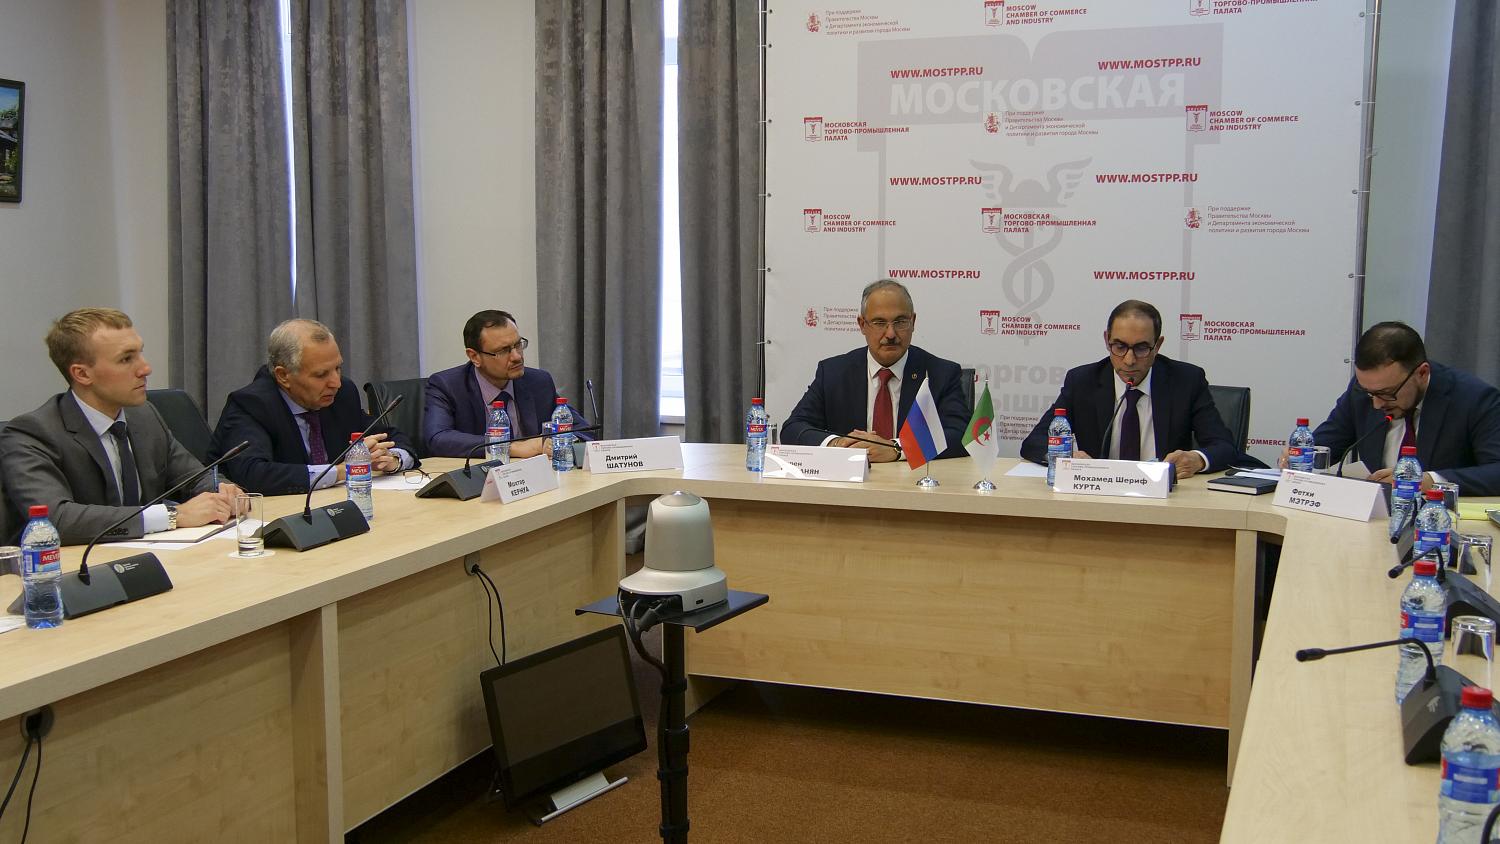 On February 18 in the Chamber of Commerce and Industry a round table on "Business cooperation between companies of the Russian Federation and the Algerian People's Democratic Republic" was held